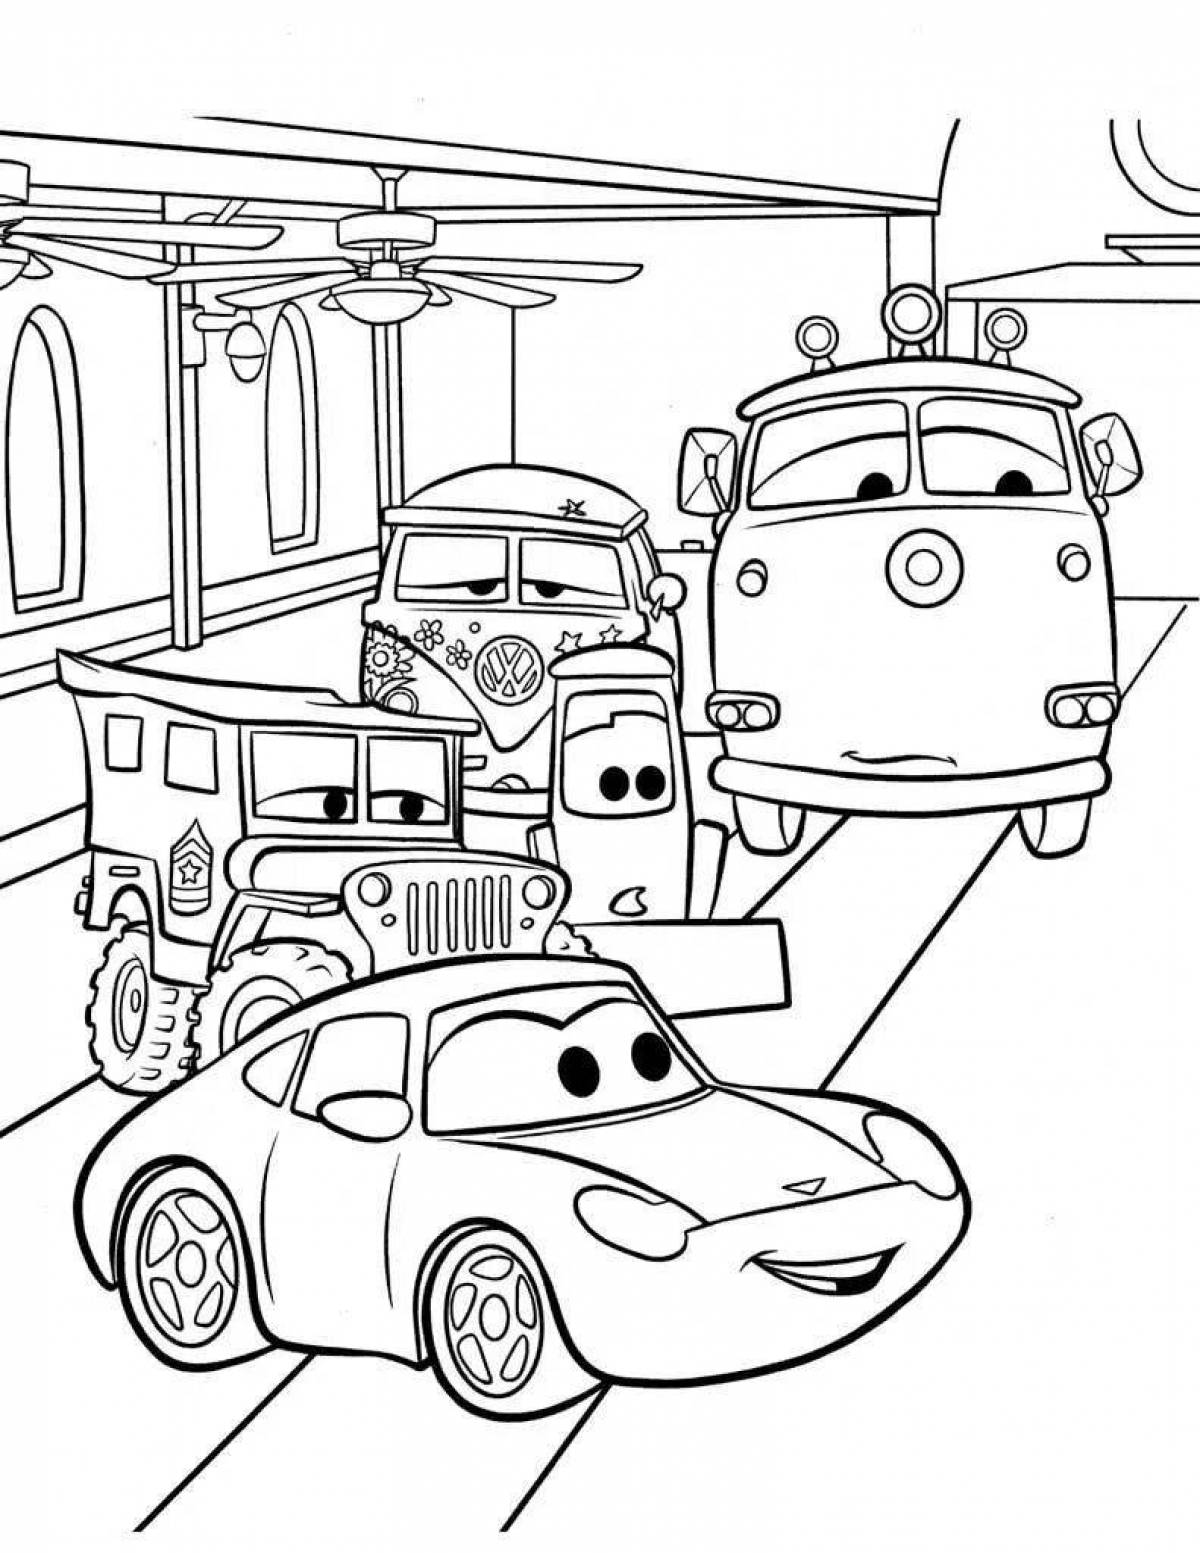 Coloring book exciting cartoon cars